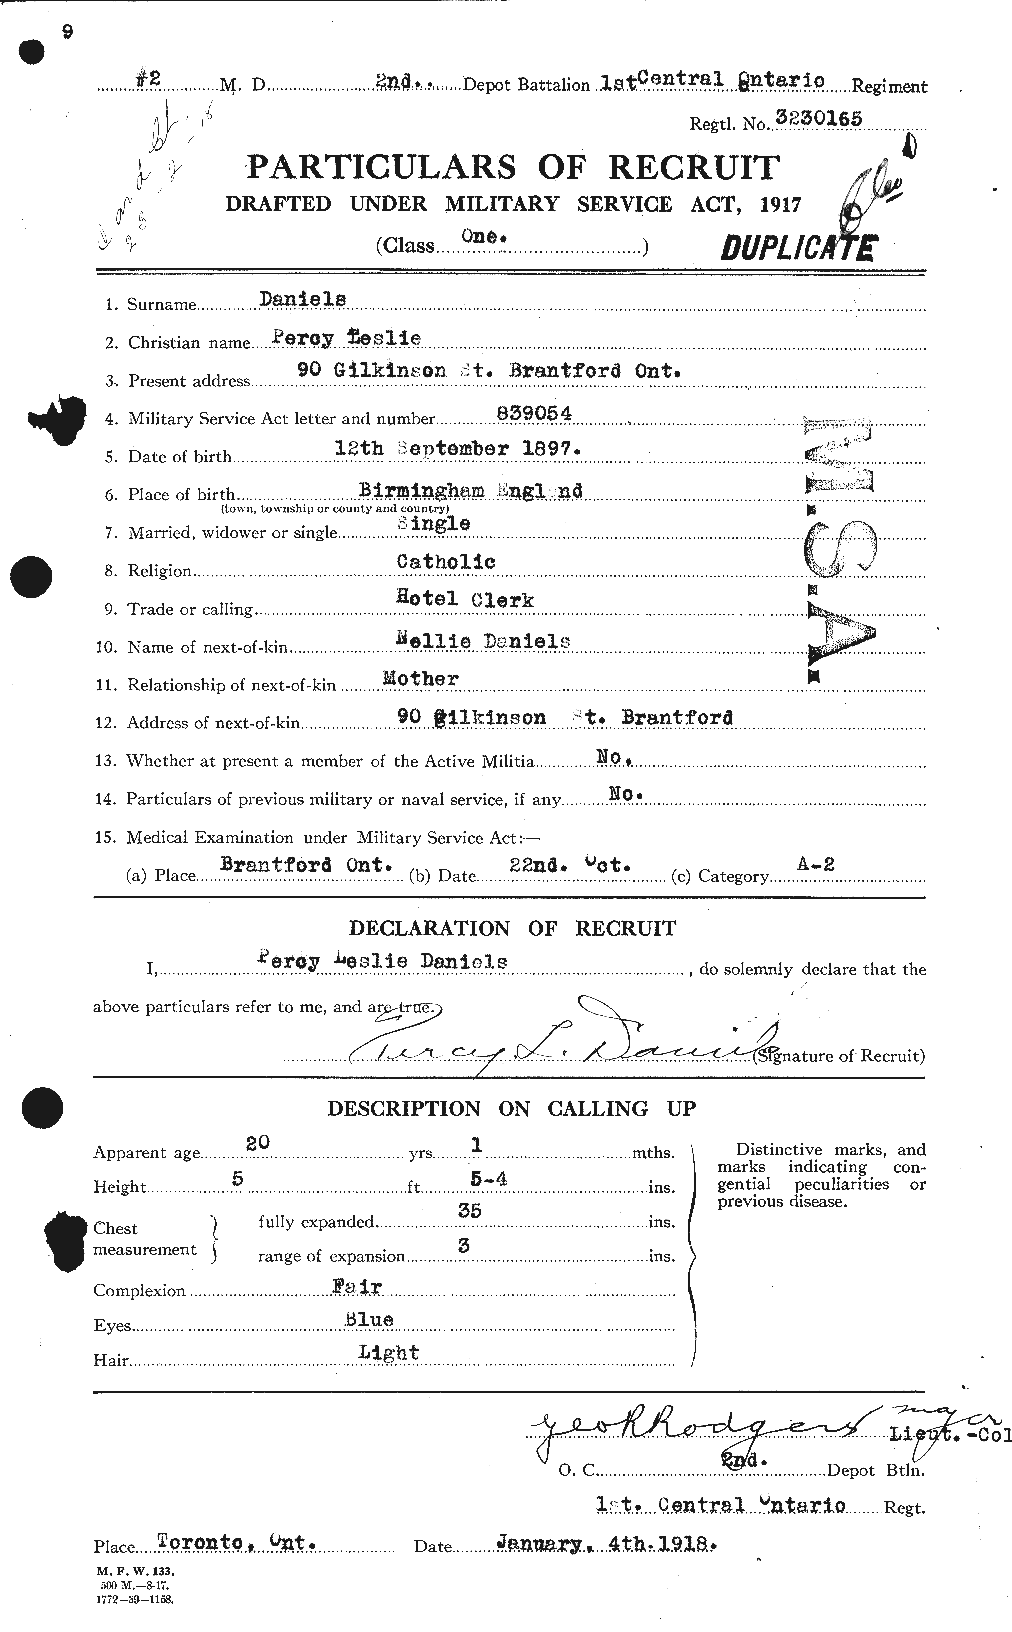 Personnel Records of the First World War - CEF 279662a